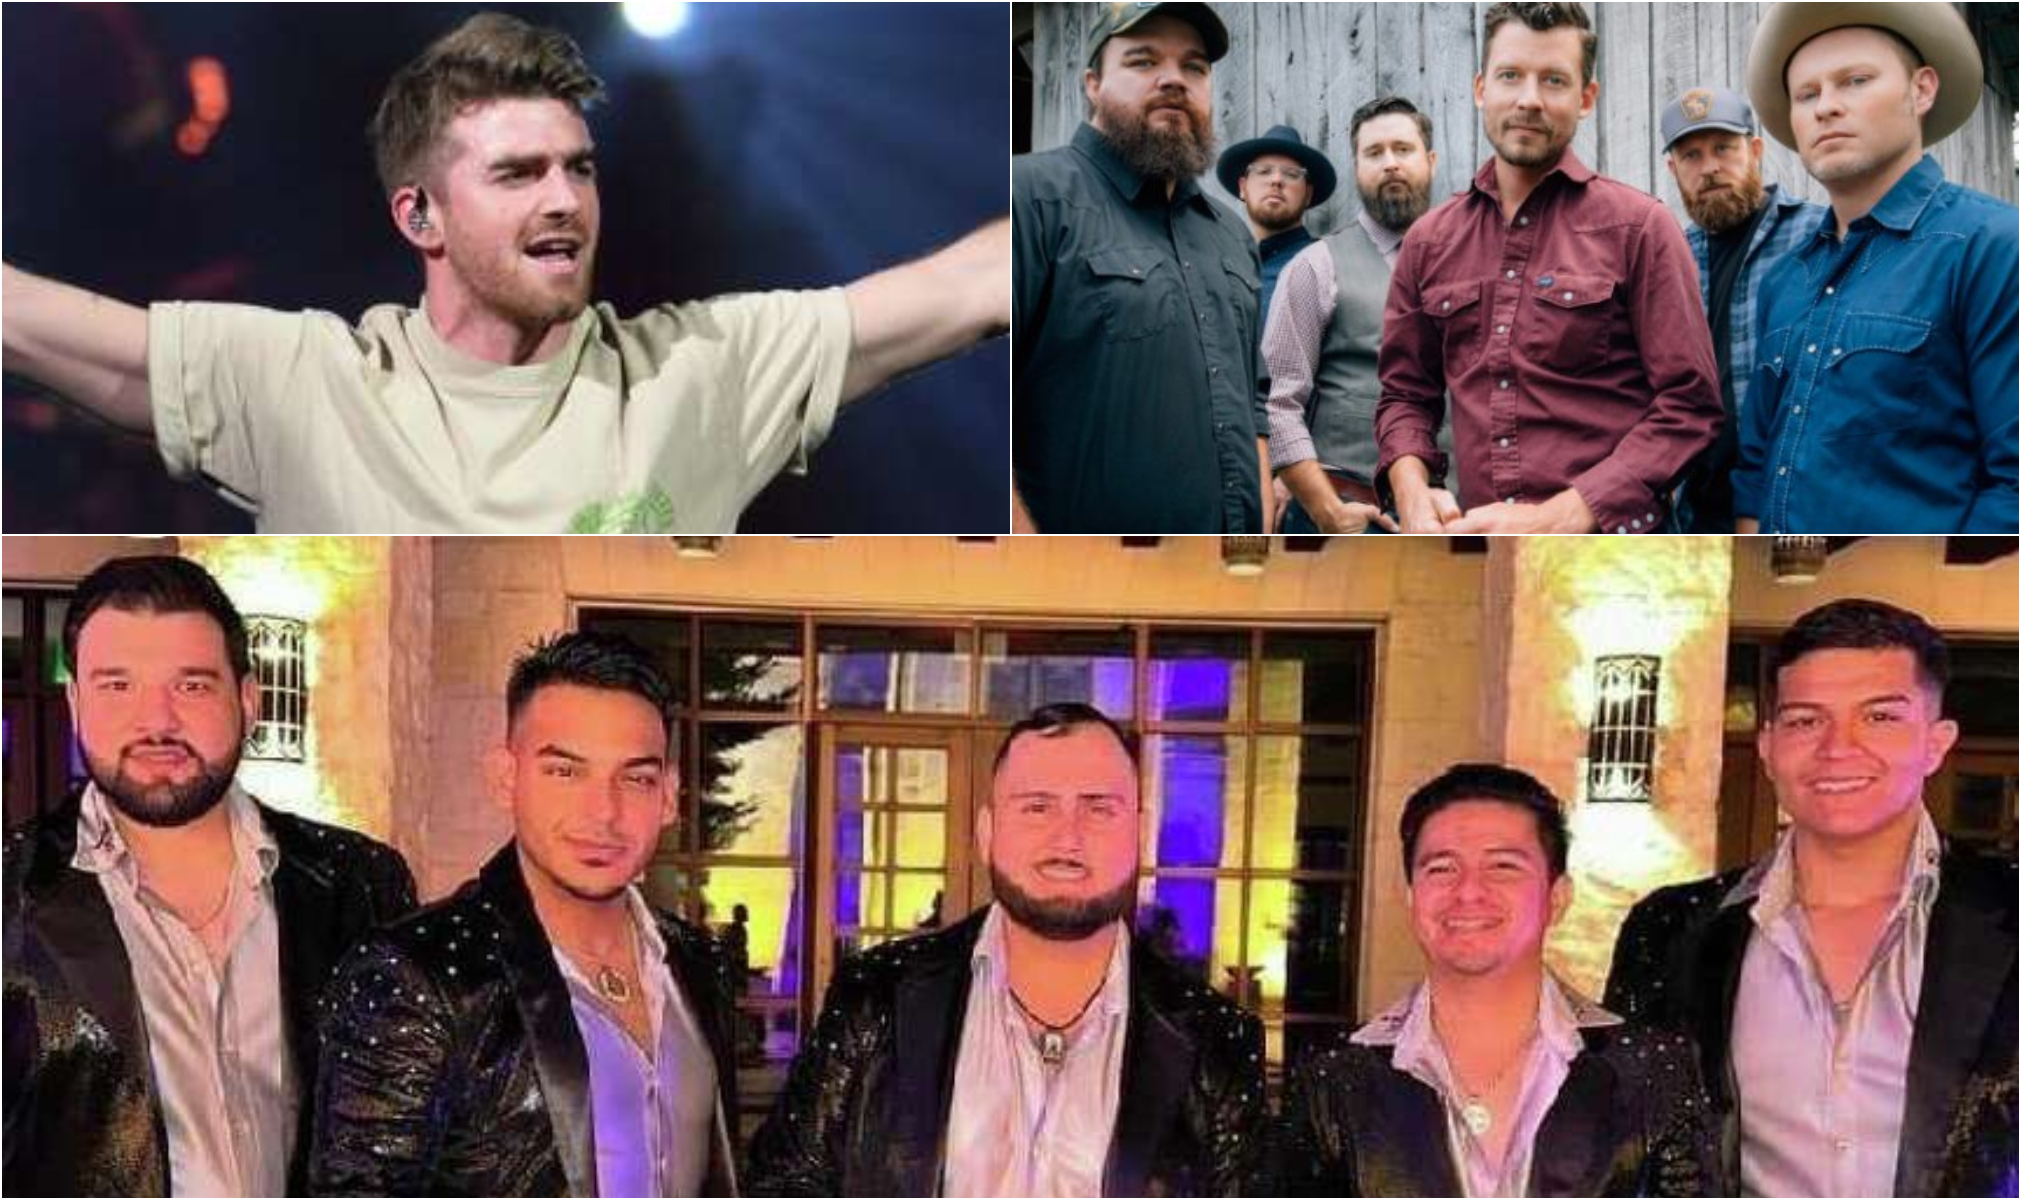 Weekend Houston Rodeo concerts Chainsmokers, Go Tejano Day and more